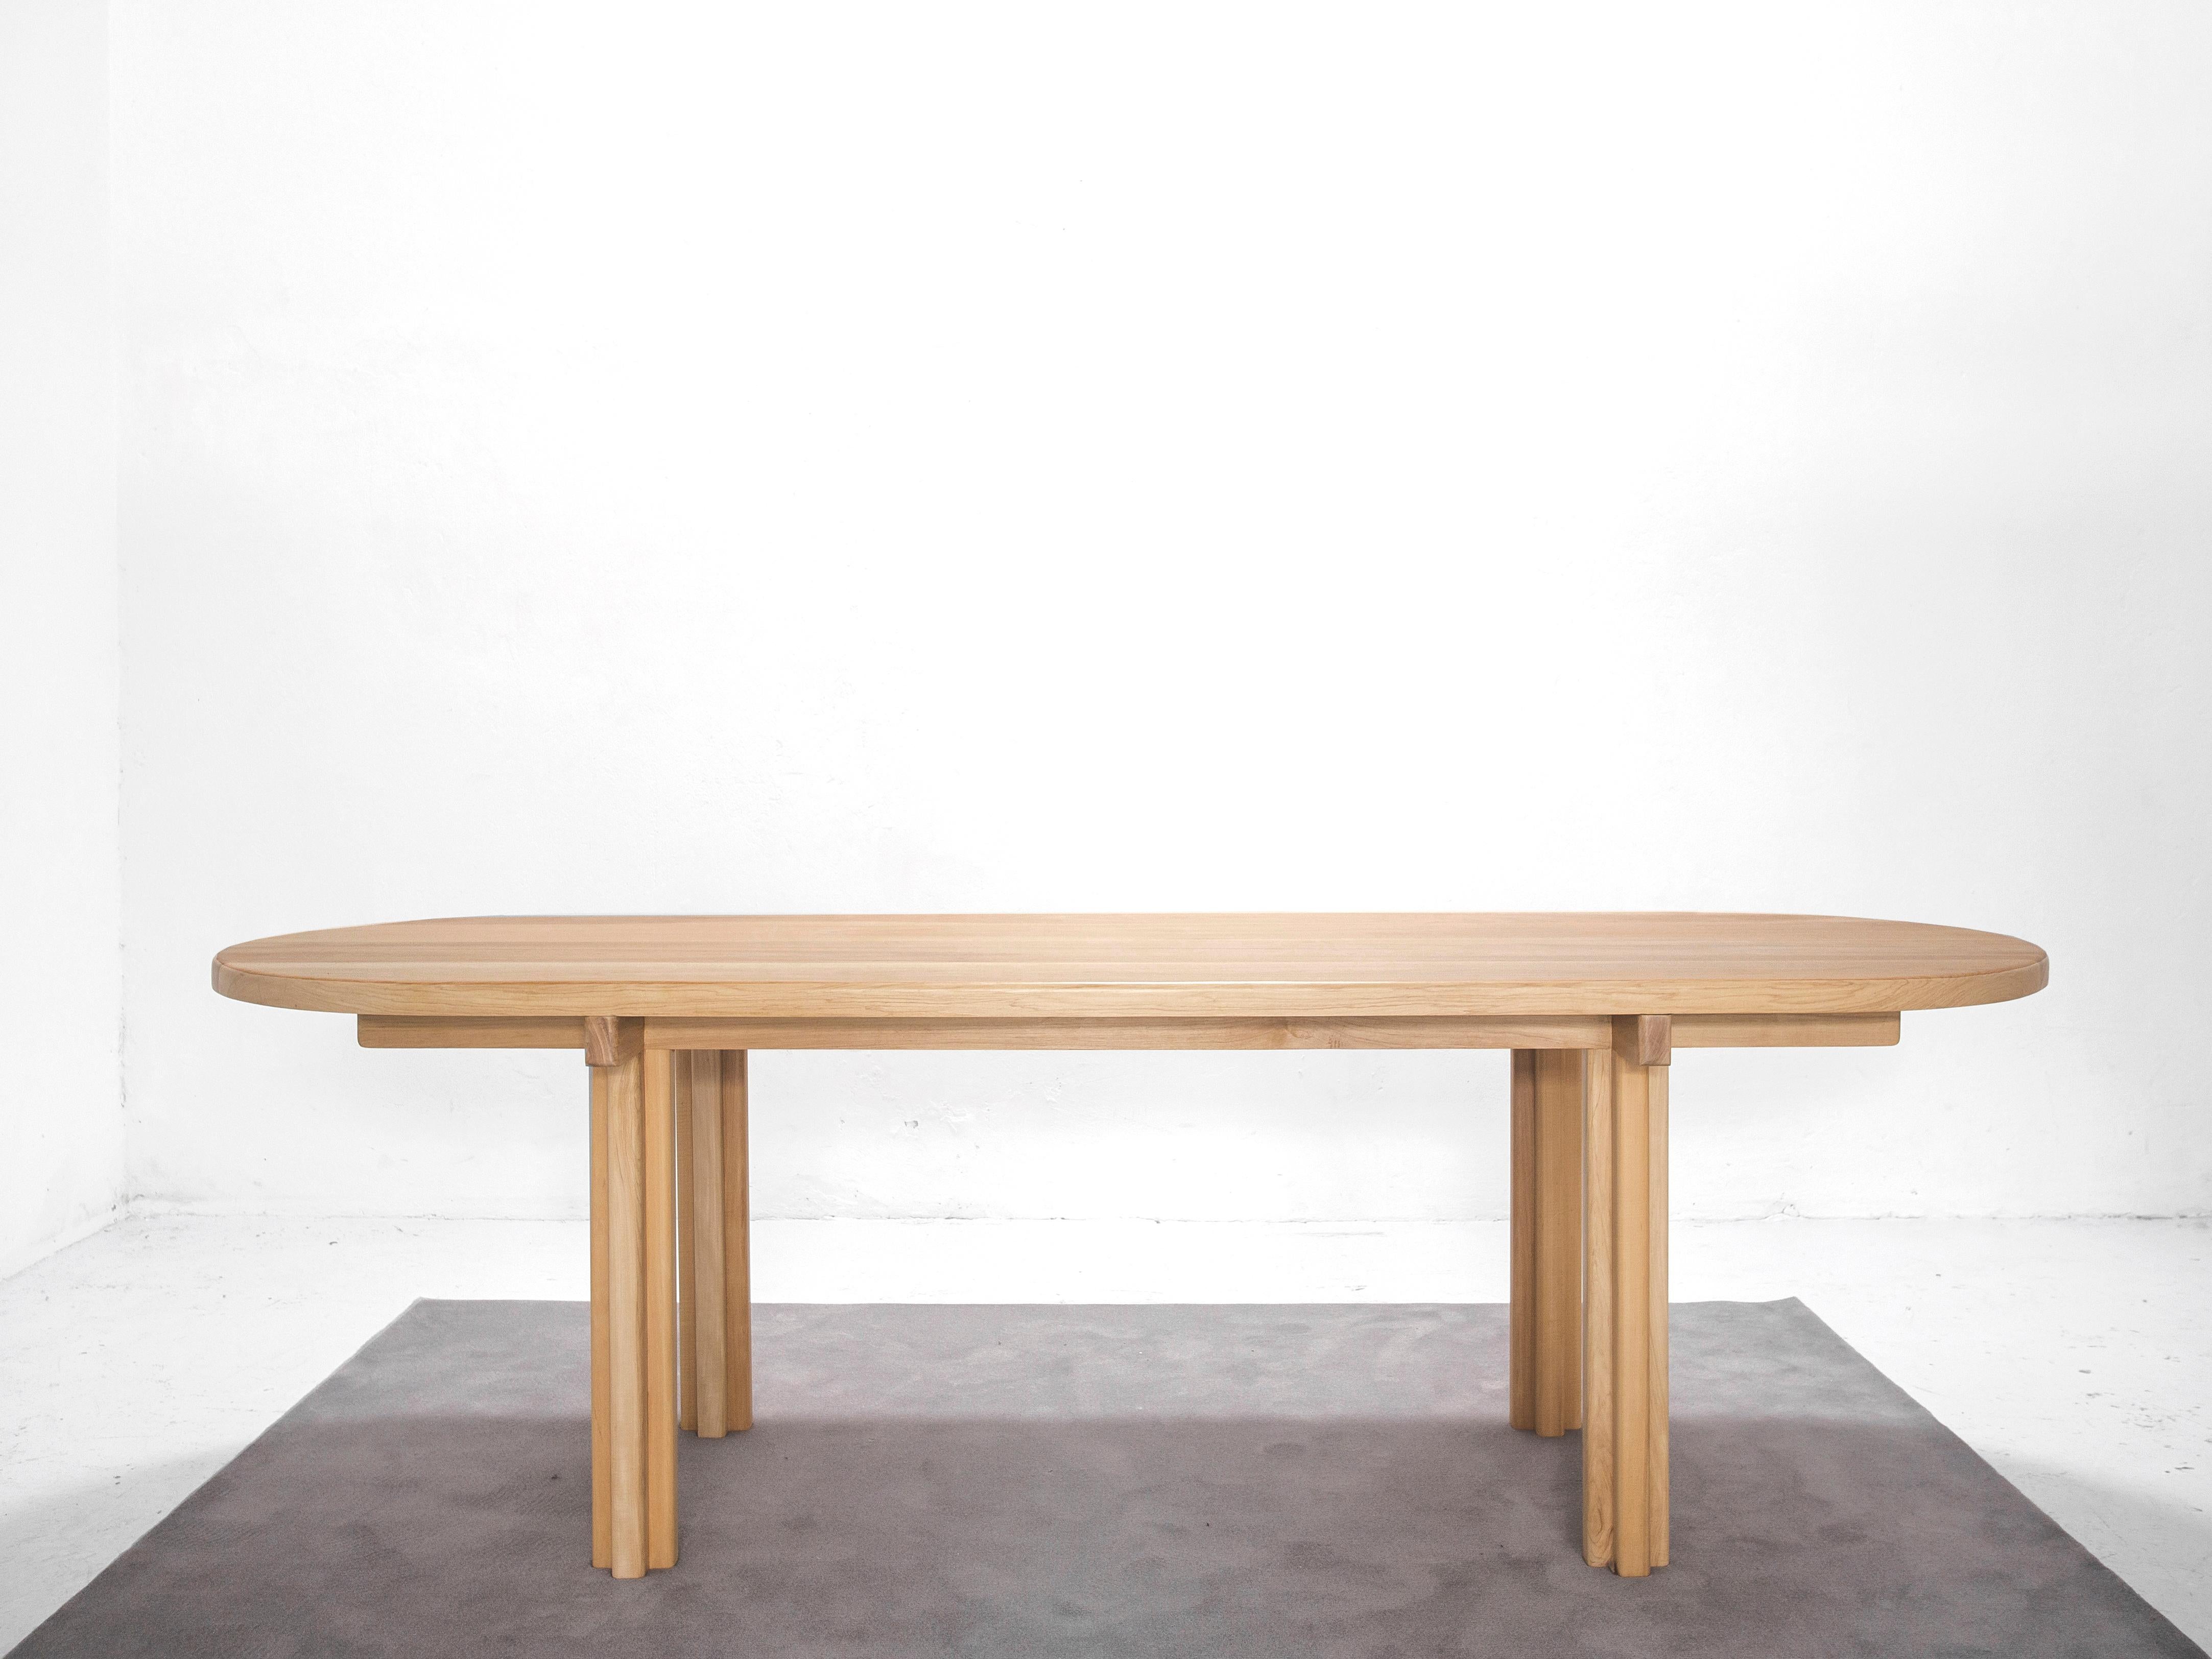 Wood Set of Orno Dining Table & 2 Chairs by Ries